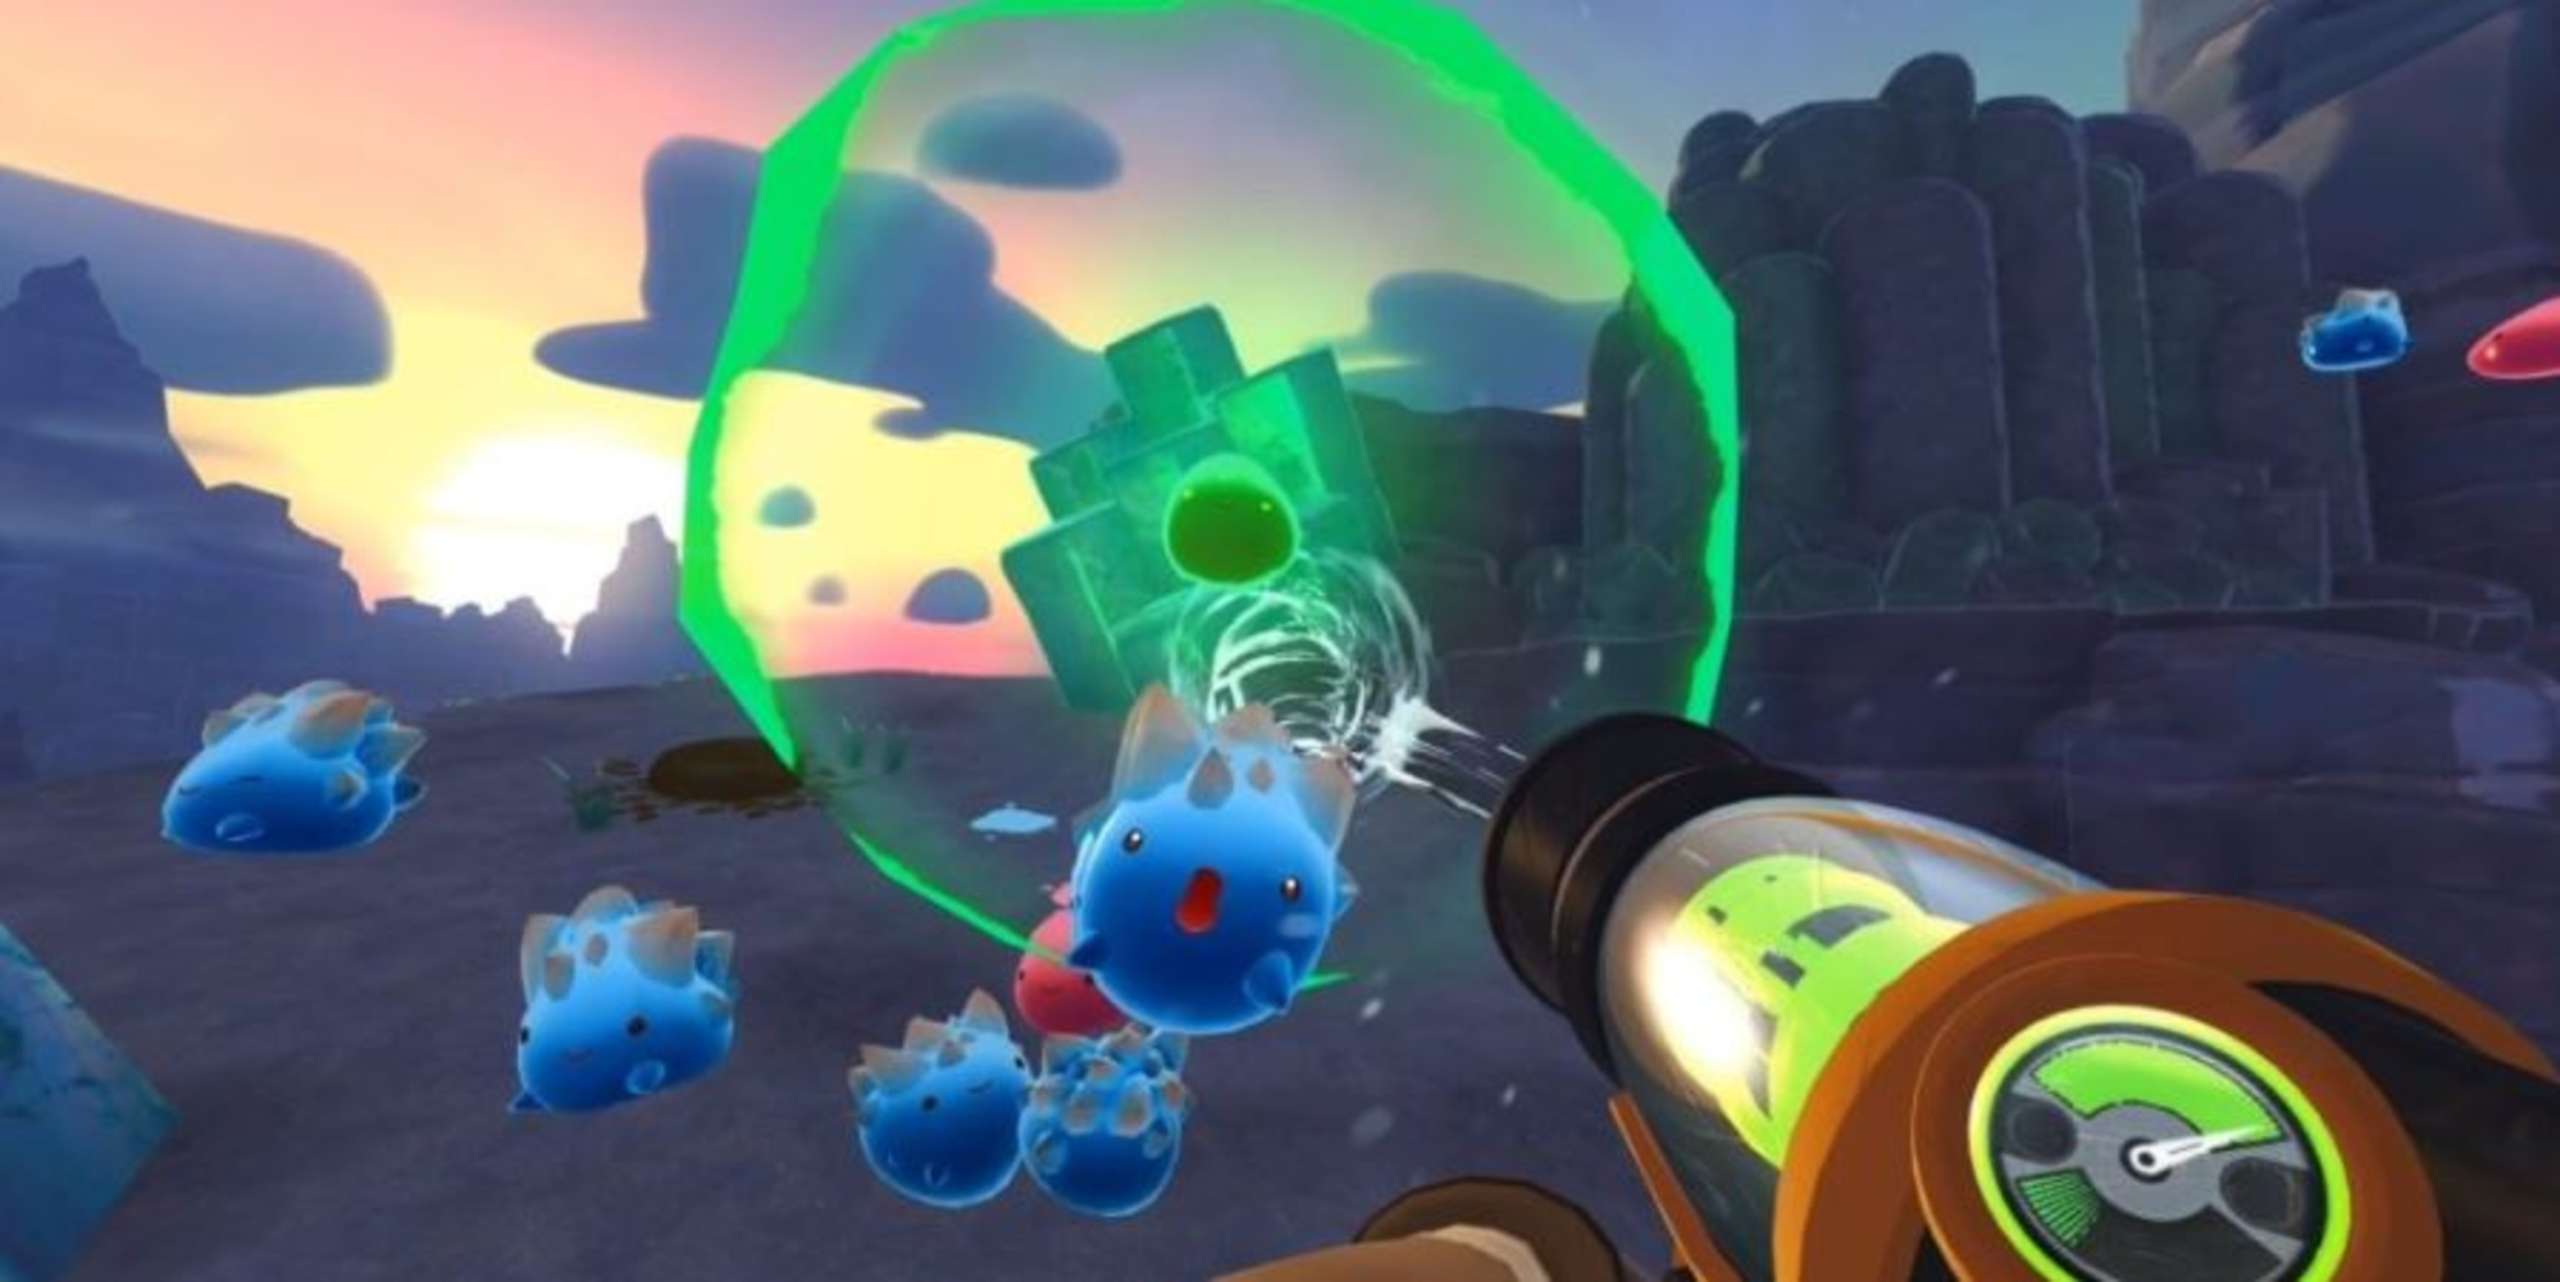 The Engaging Life Simulation Adventure Game Slime Rancher Will Be Removed From the Xbox Game Pass Upon The Release Of Its Sequel